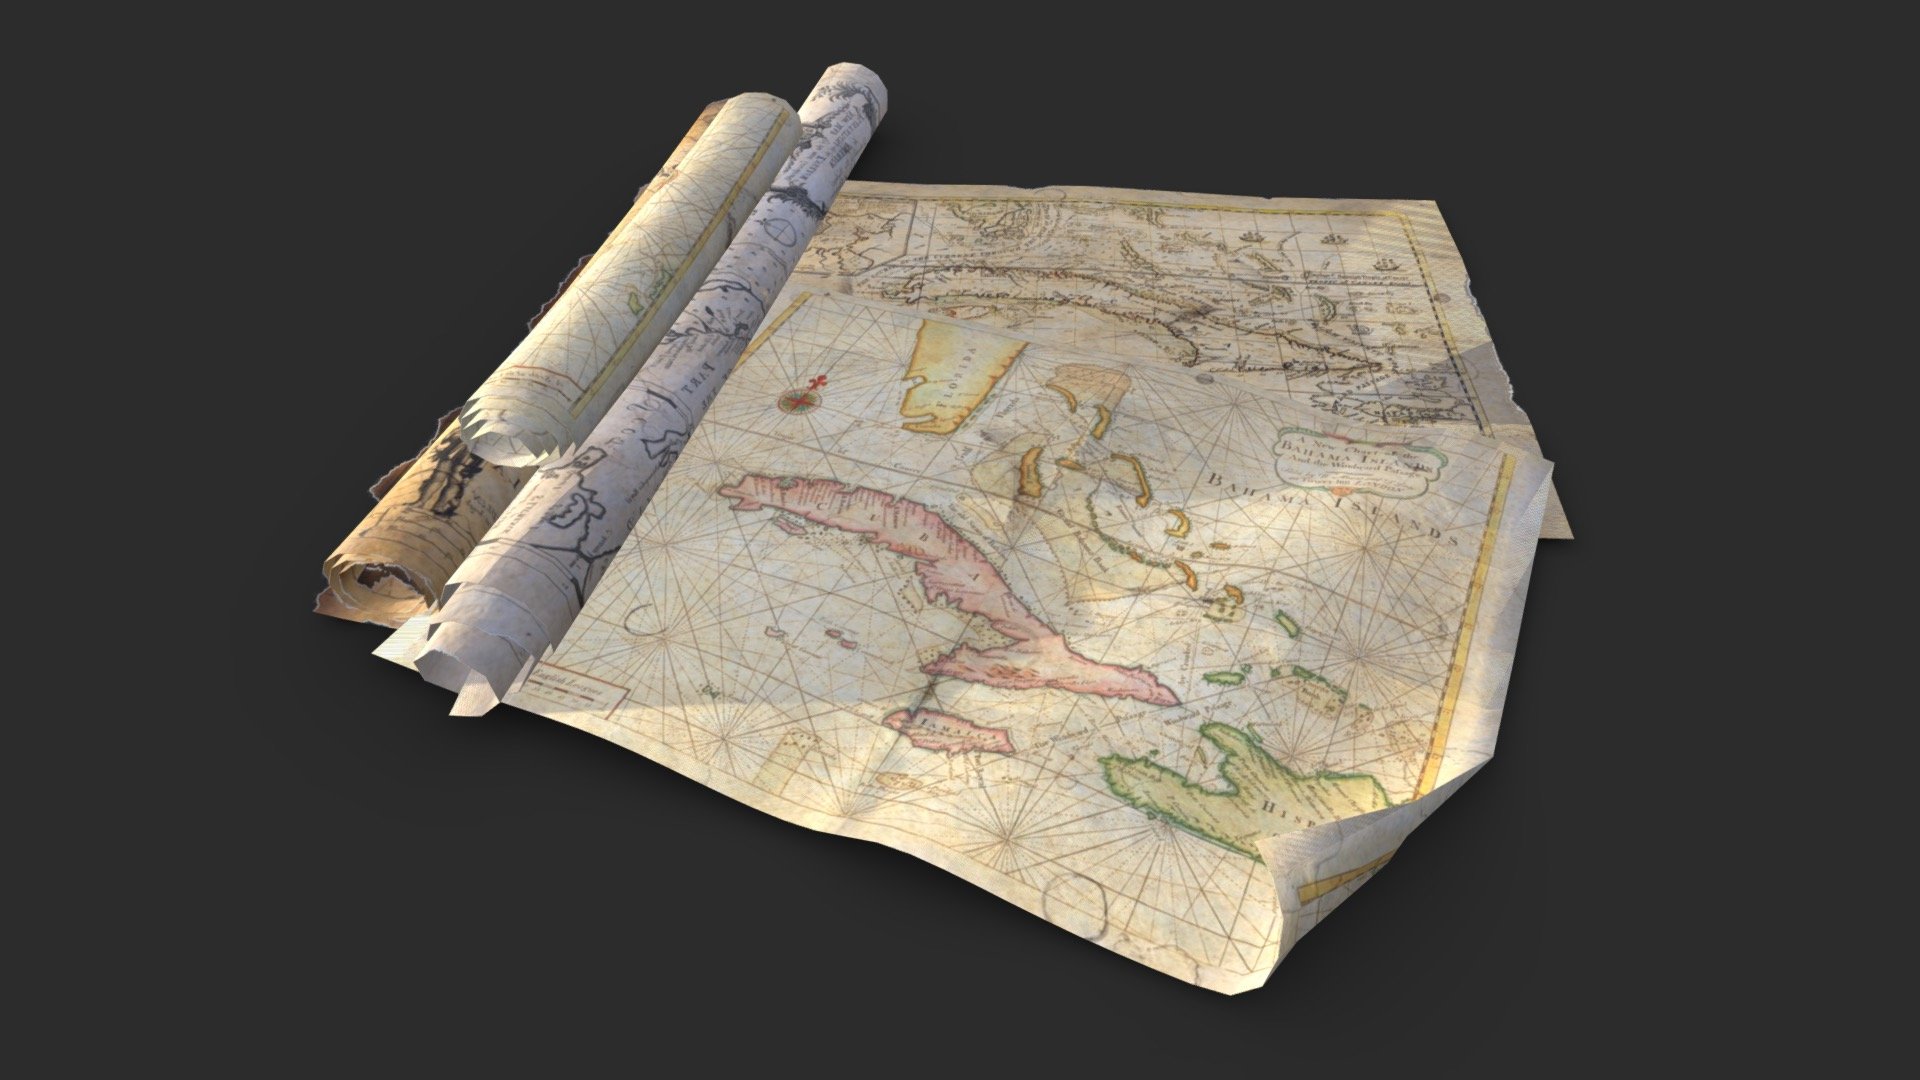 This vintage historical Caribbean maps pack including 12 individual objects (4 designs for 3 meshes types each) with 3 LODs and collision boxes to get the best optimization and the best quality for the most popular game engines. All elements can easily be positioned together to create a more detailed scene.

The 3 meshes :
* Rolled maps
* Curved corners maps
* Flatted maps

This AAA game asset of old parchments will embellish you scene and add more details which can help the gameplay and the game-design.

Low-poly model &amp; Blender native 2.91

SPECIFICATIONS

Objects : 12
Polygons : 1446
Subdivision ready : Yes
Render engine : Eevee (Cycles ready)

GAME SPECS

LODs : Yes (inside FBX for Unity &amp; Unreal)
Numbers of LODs : 3
Collider : Yes
Lightmap UV : No

EXPORTED FORMATS

FBX
Collada
OBJ

TEXTURES

Materials in scene : 1
Textures sizes : 4K
Textures types : Base Color, Metallic, Roughness, Normal (DirectX &amp; OpenGL), Heigh &amp; AO (also Unity &amp; Unreal workflow maps)
Textures format : PNG - Old Caribbean Maps - Buy Royalty Free 3D model by KangaroOz 3D (@KangaroOz-3D) 3d model